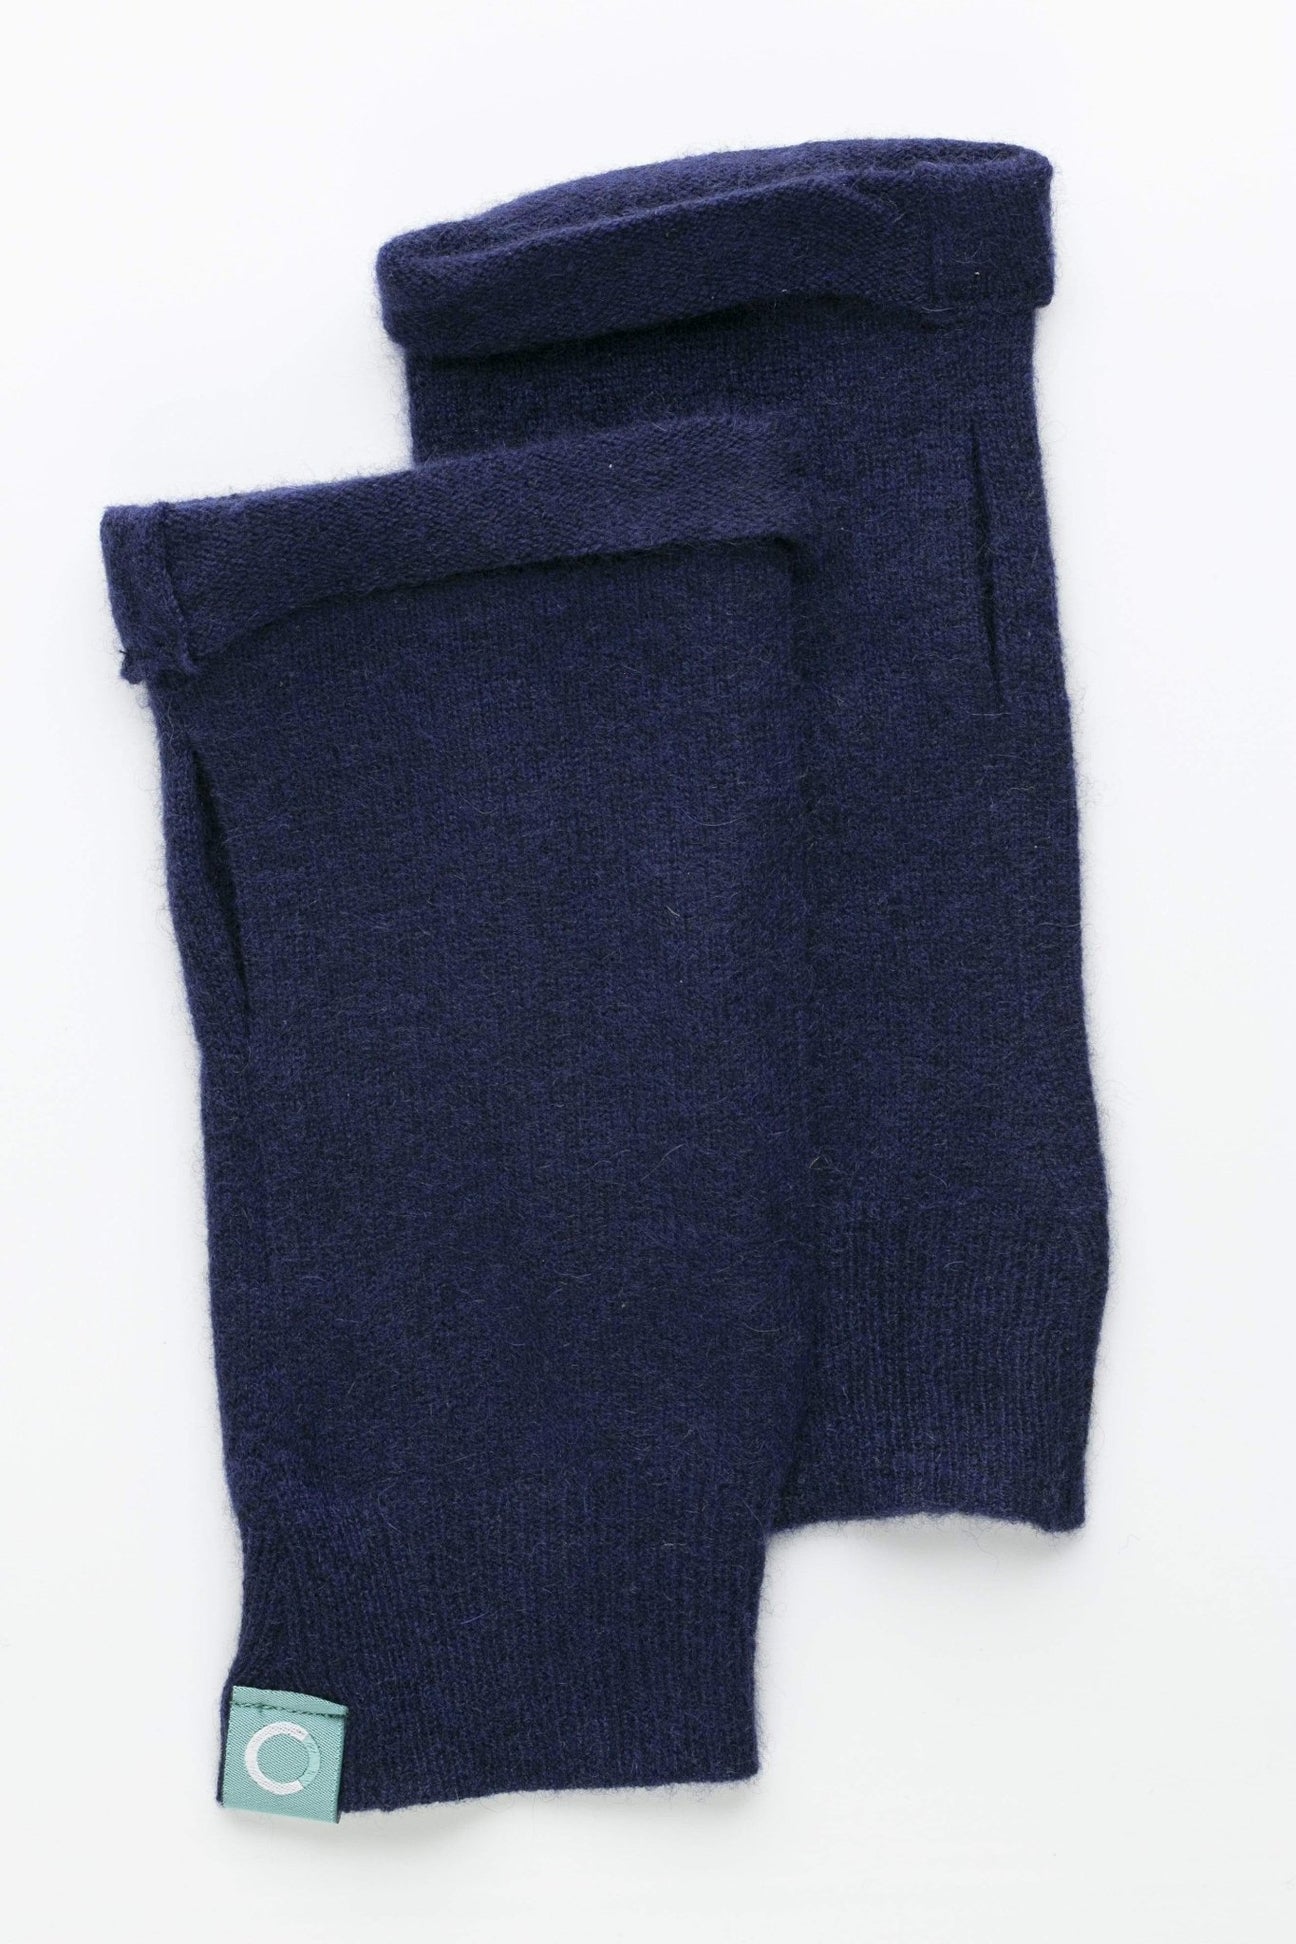 Recycled Cashmere Gloves | Made in Scotland | Cashmere Circle ...